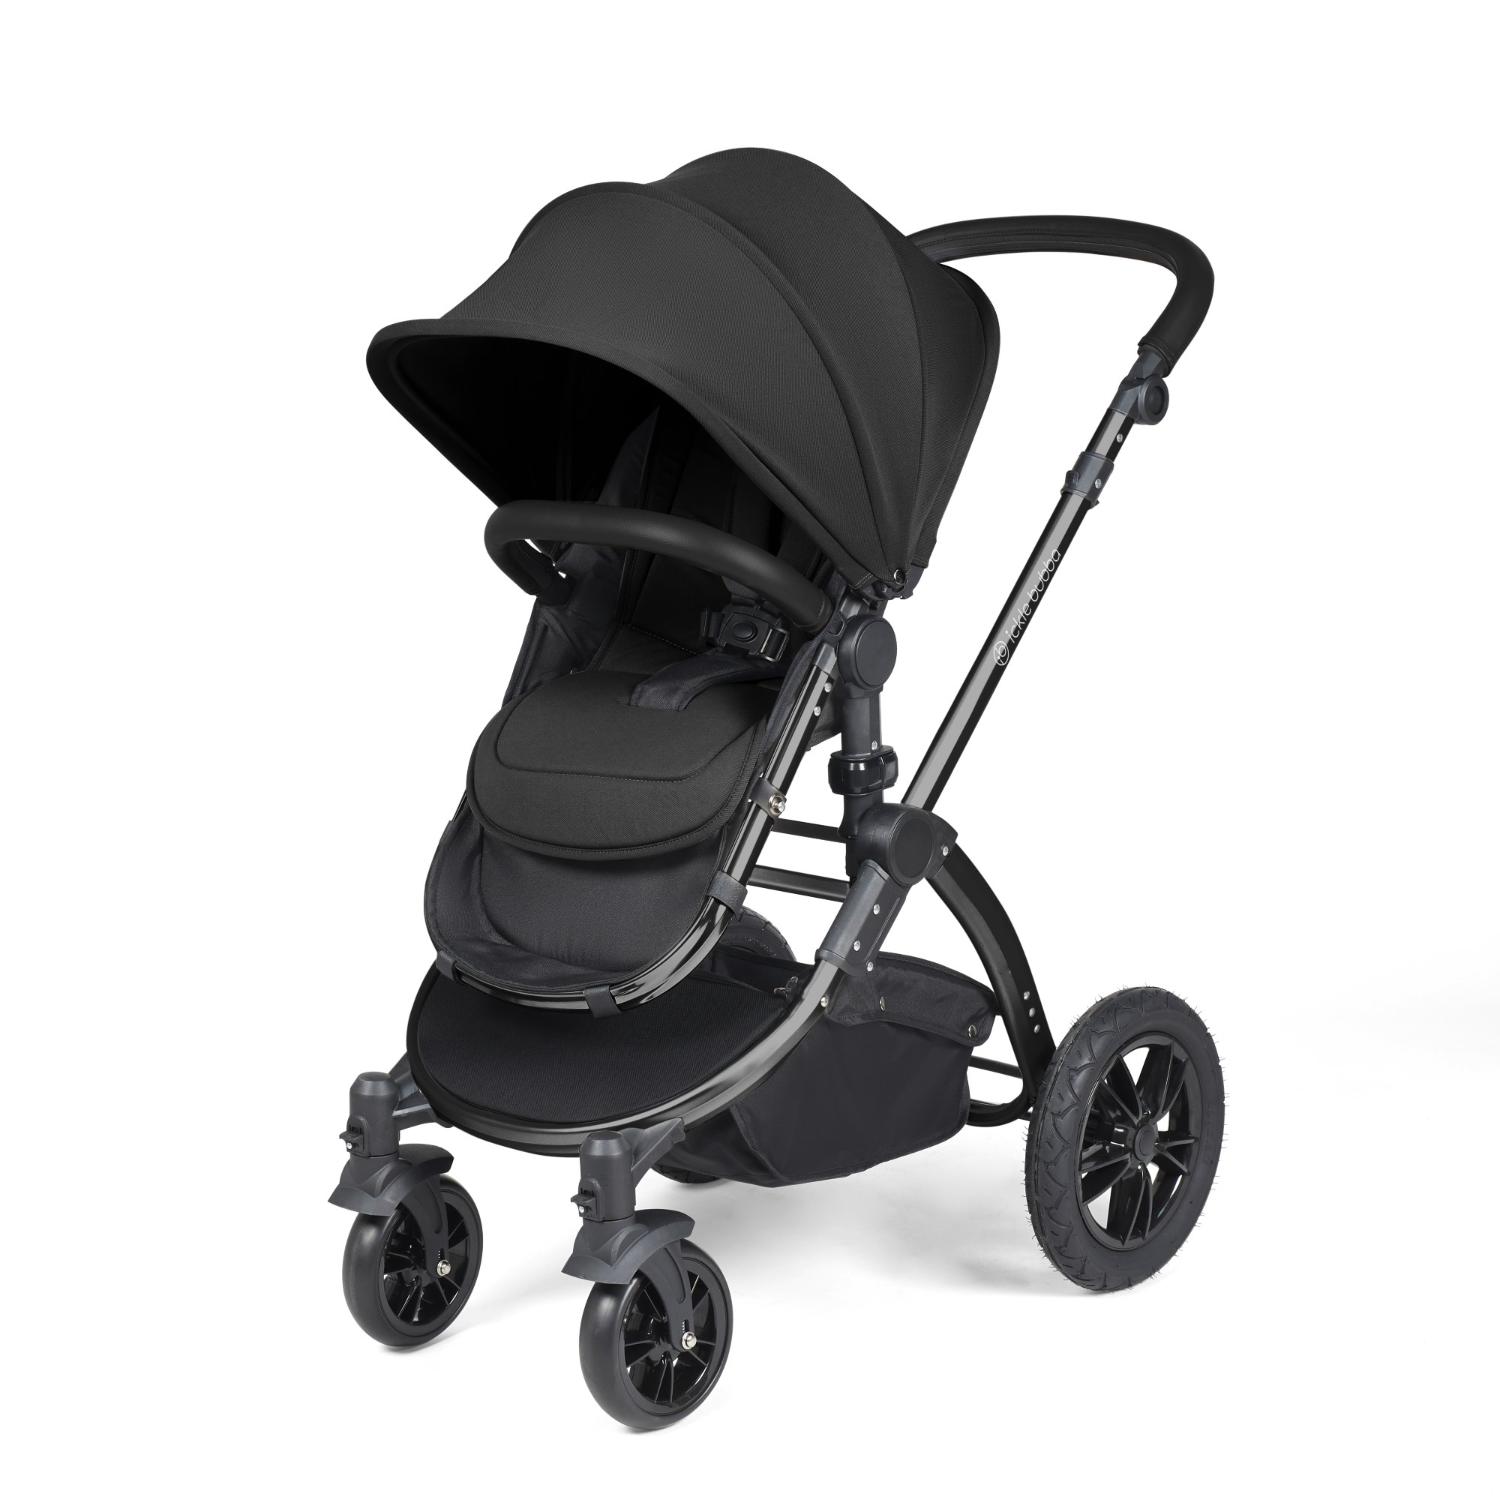 Ickle Bubba Stomp Luxe Pushchair with seat unit attached in Midnight black colour